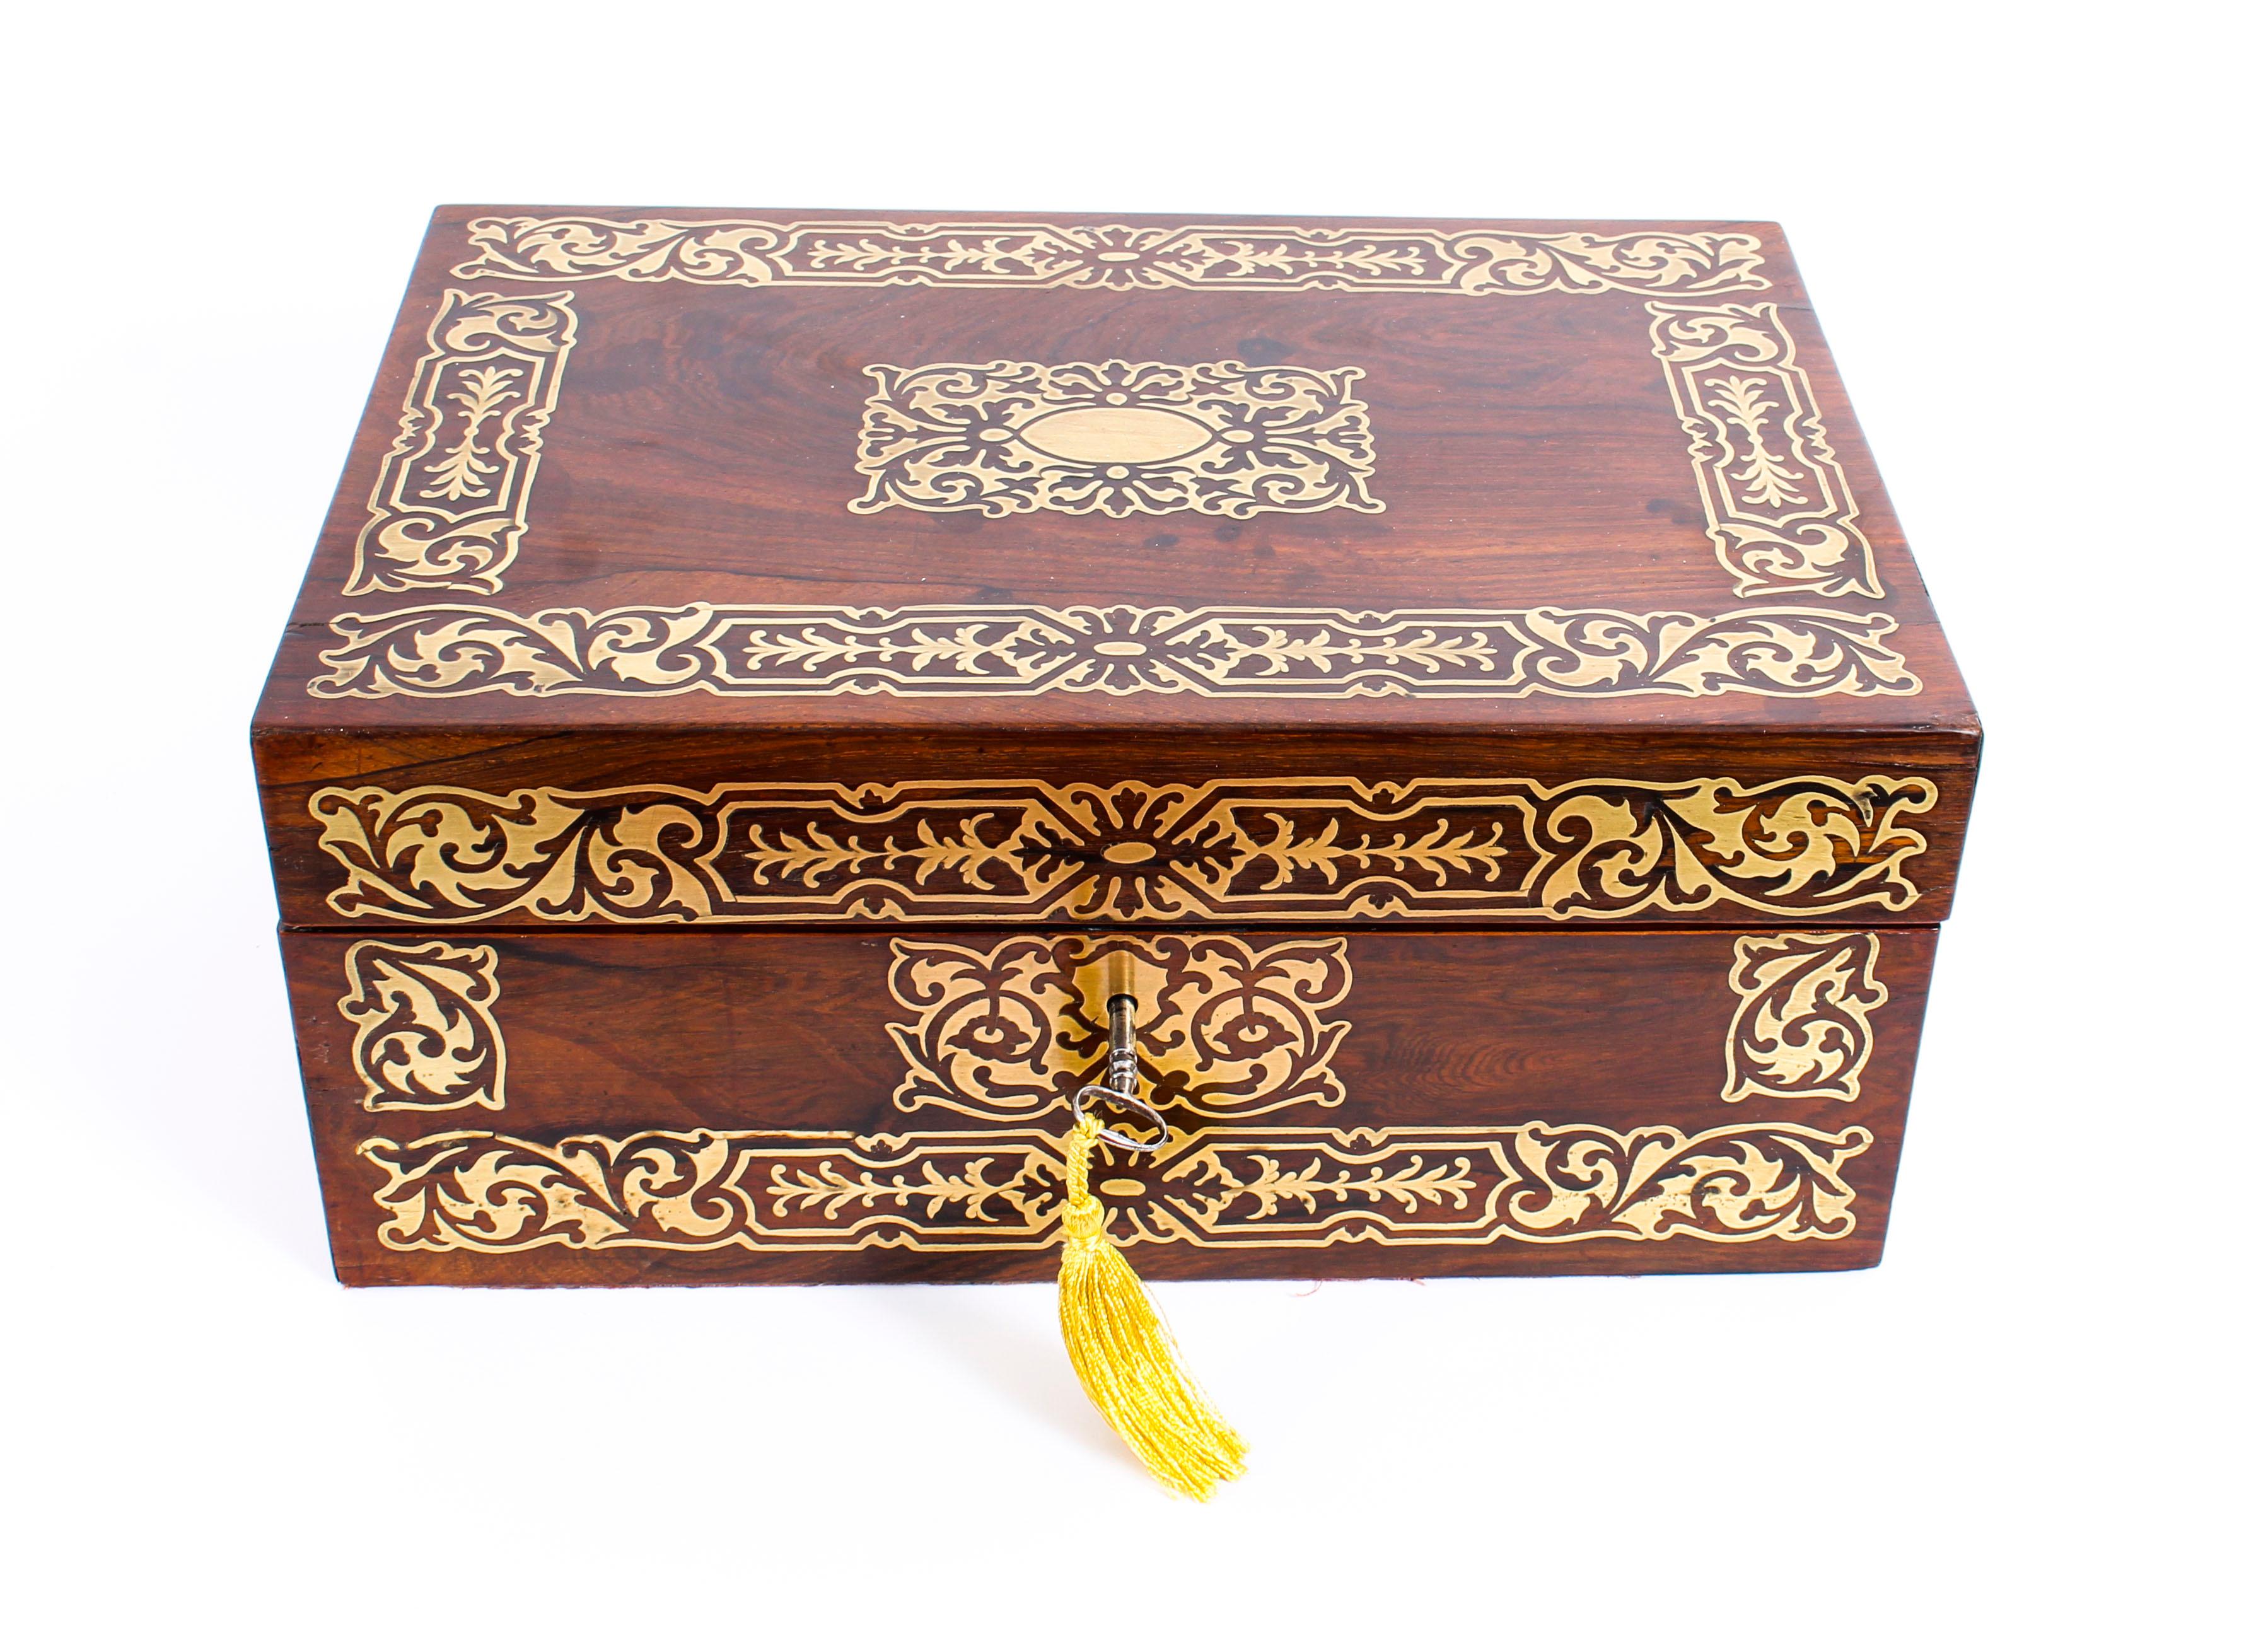 This is a highly decorative antique Regency rosewood and brass inlaid writing and stationery slope of rectangular shape, circa 1820 in date.

The box is profusely inlaid with decorative brass foliate scrollwork decoration and features recessed